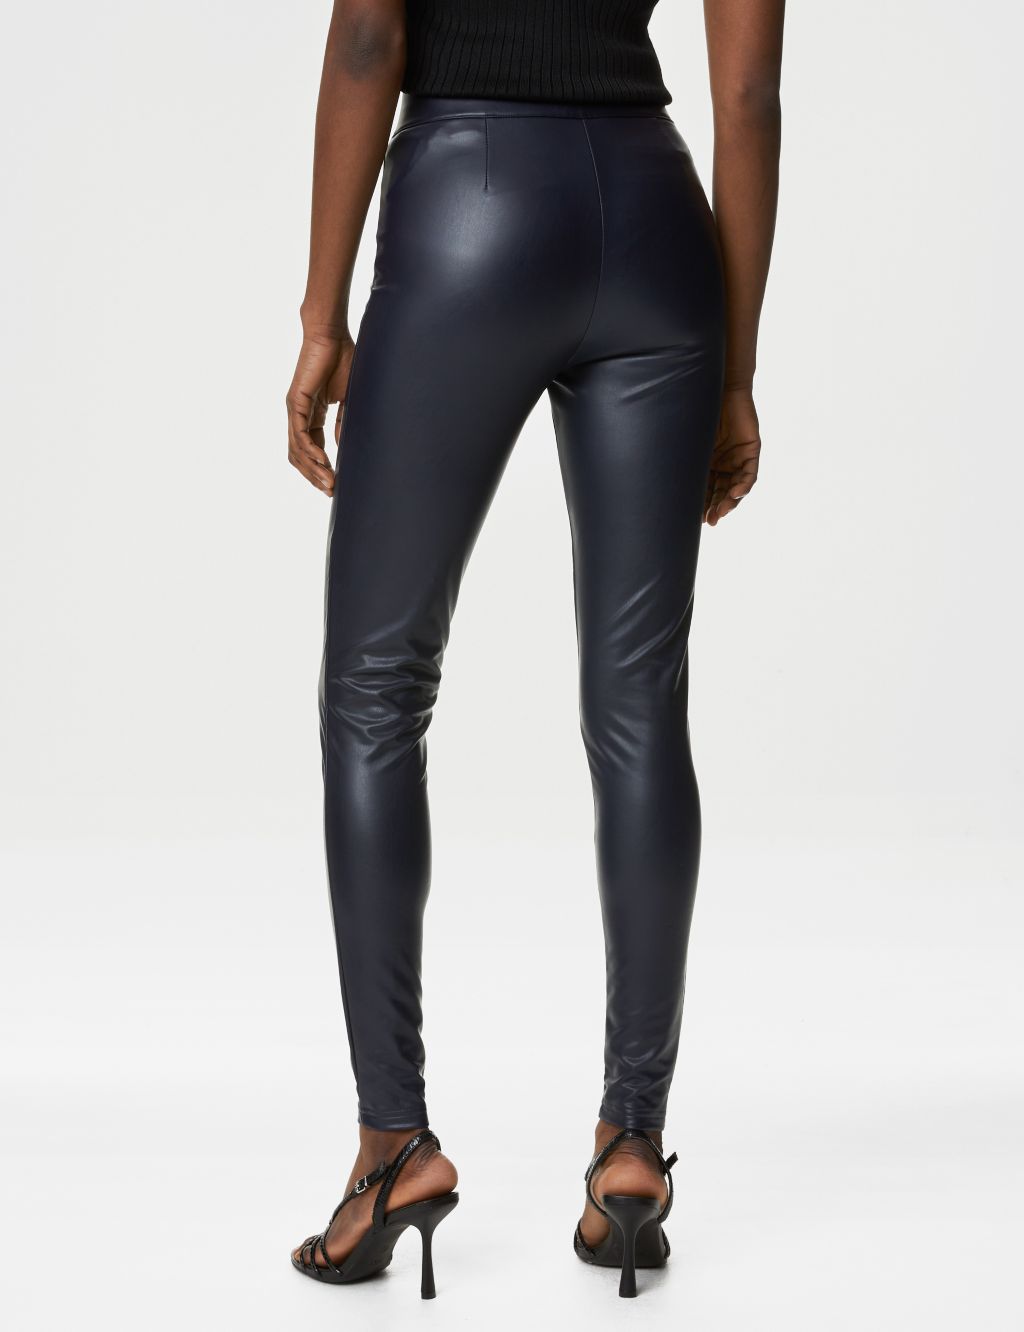 Leather Look High Waisted Leggings image 5